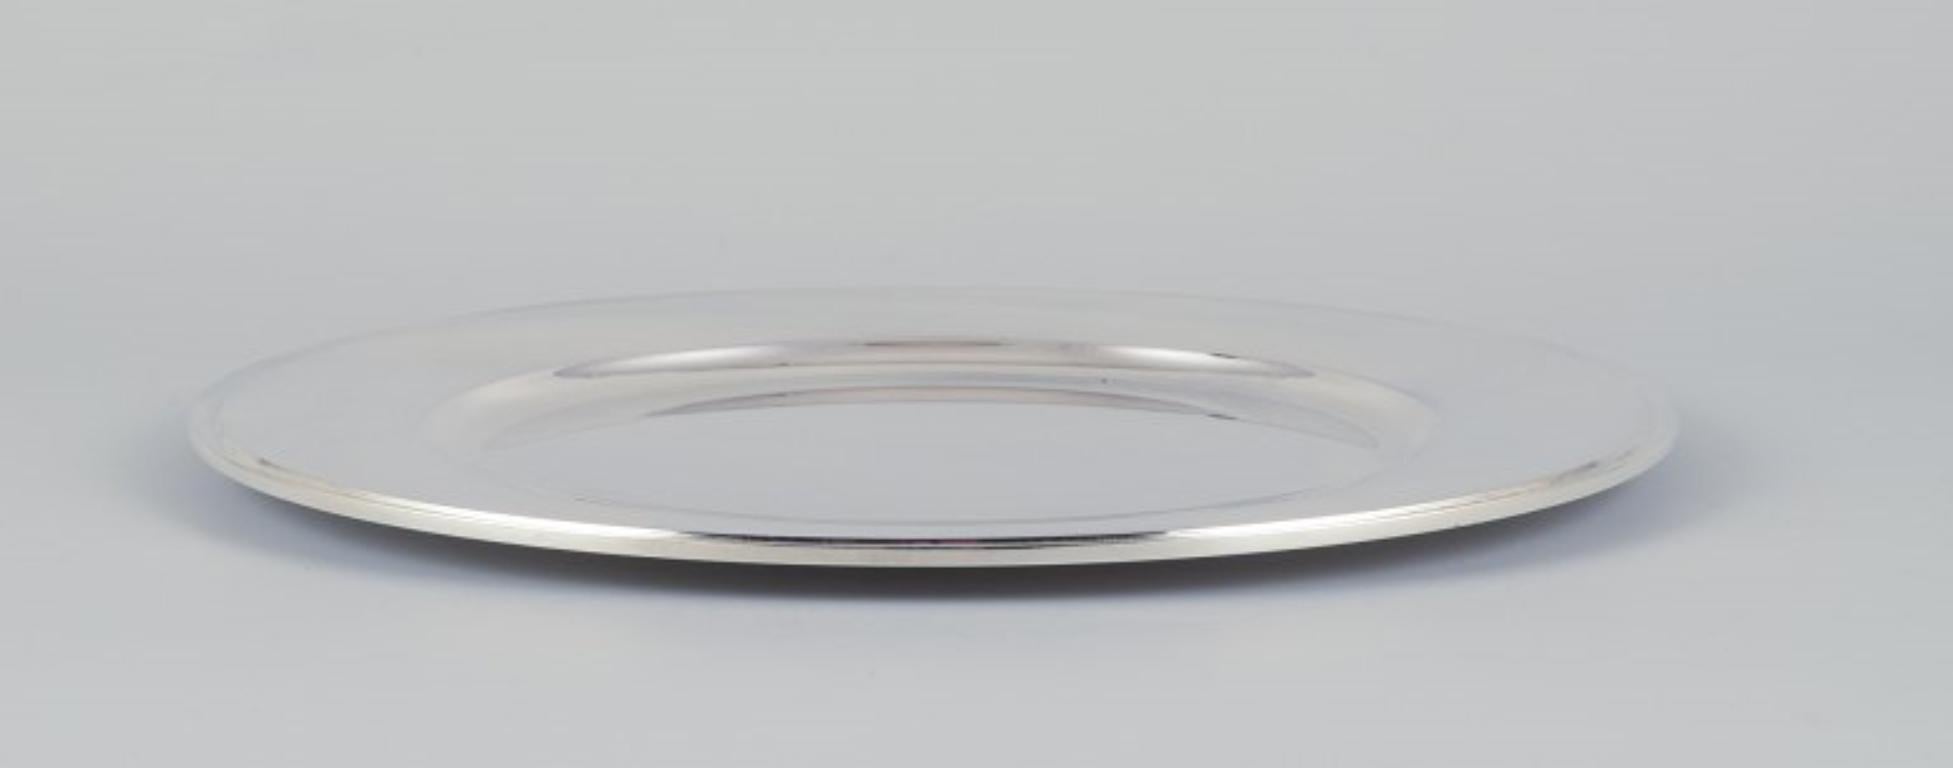 Danish Harald Nielsen for Georg Jensen. Charger plate in sterling silver. For Sale